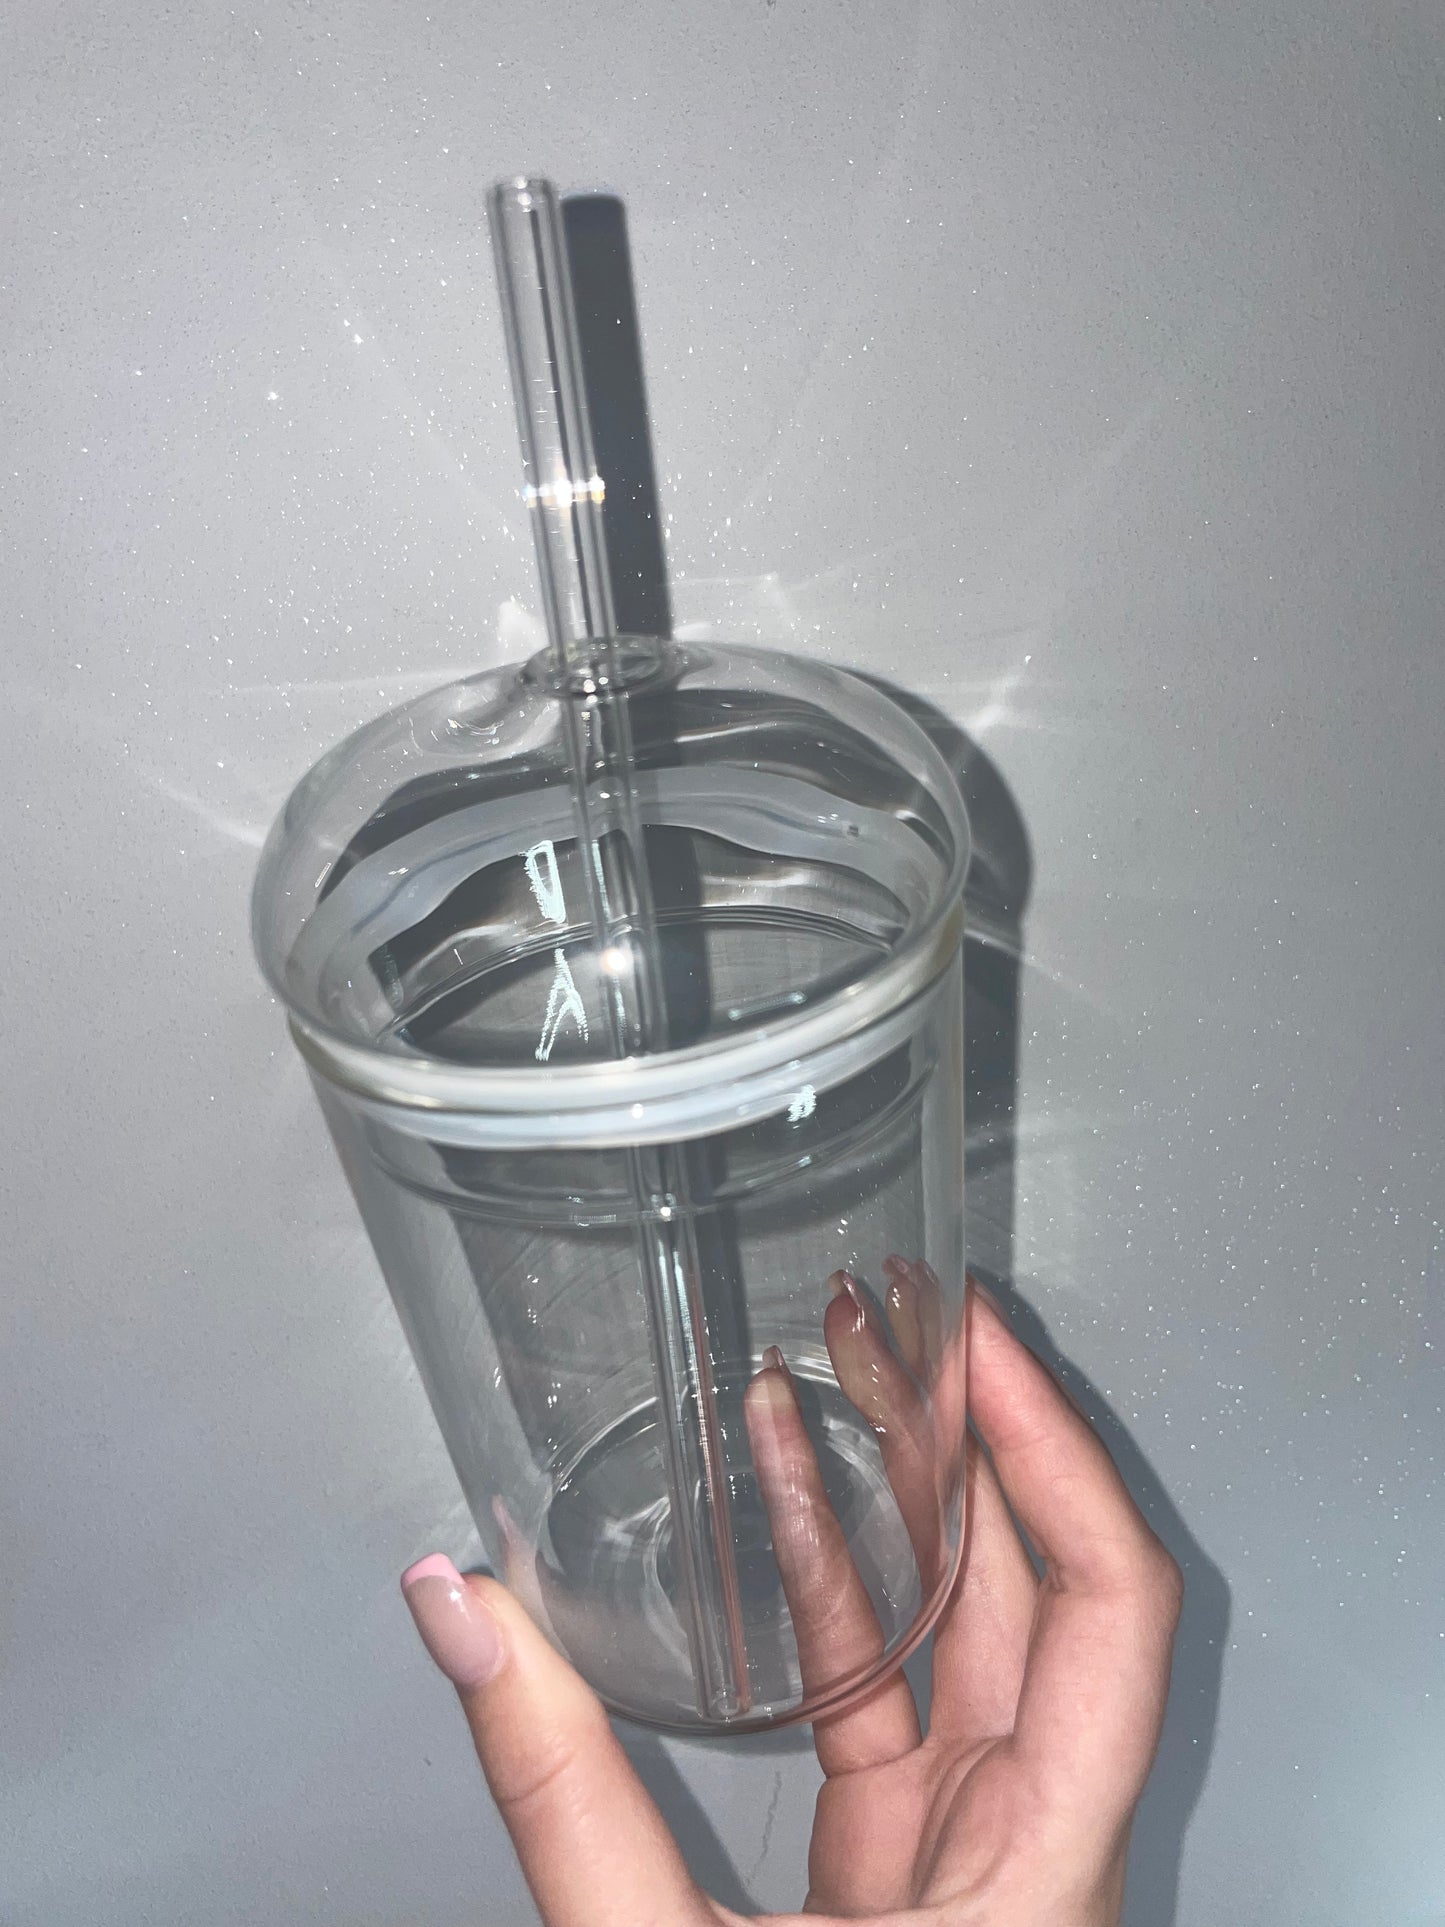 Glass straw cup